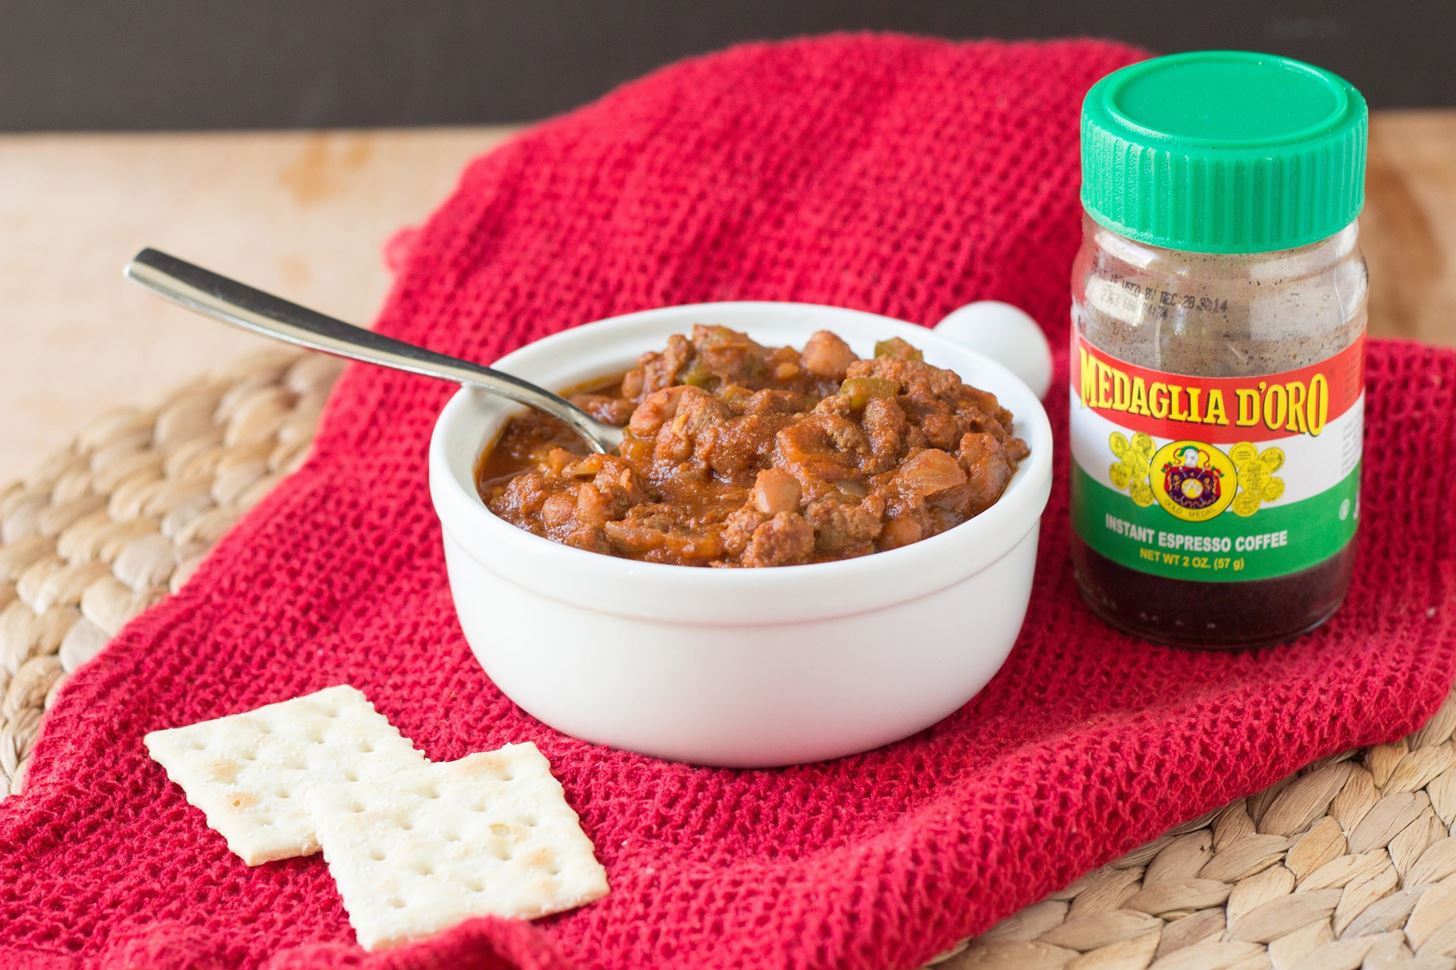 TESTED: 10 Secret & Bizarre Chili Ingredients—Here's the Best